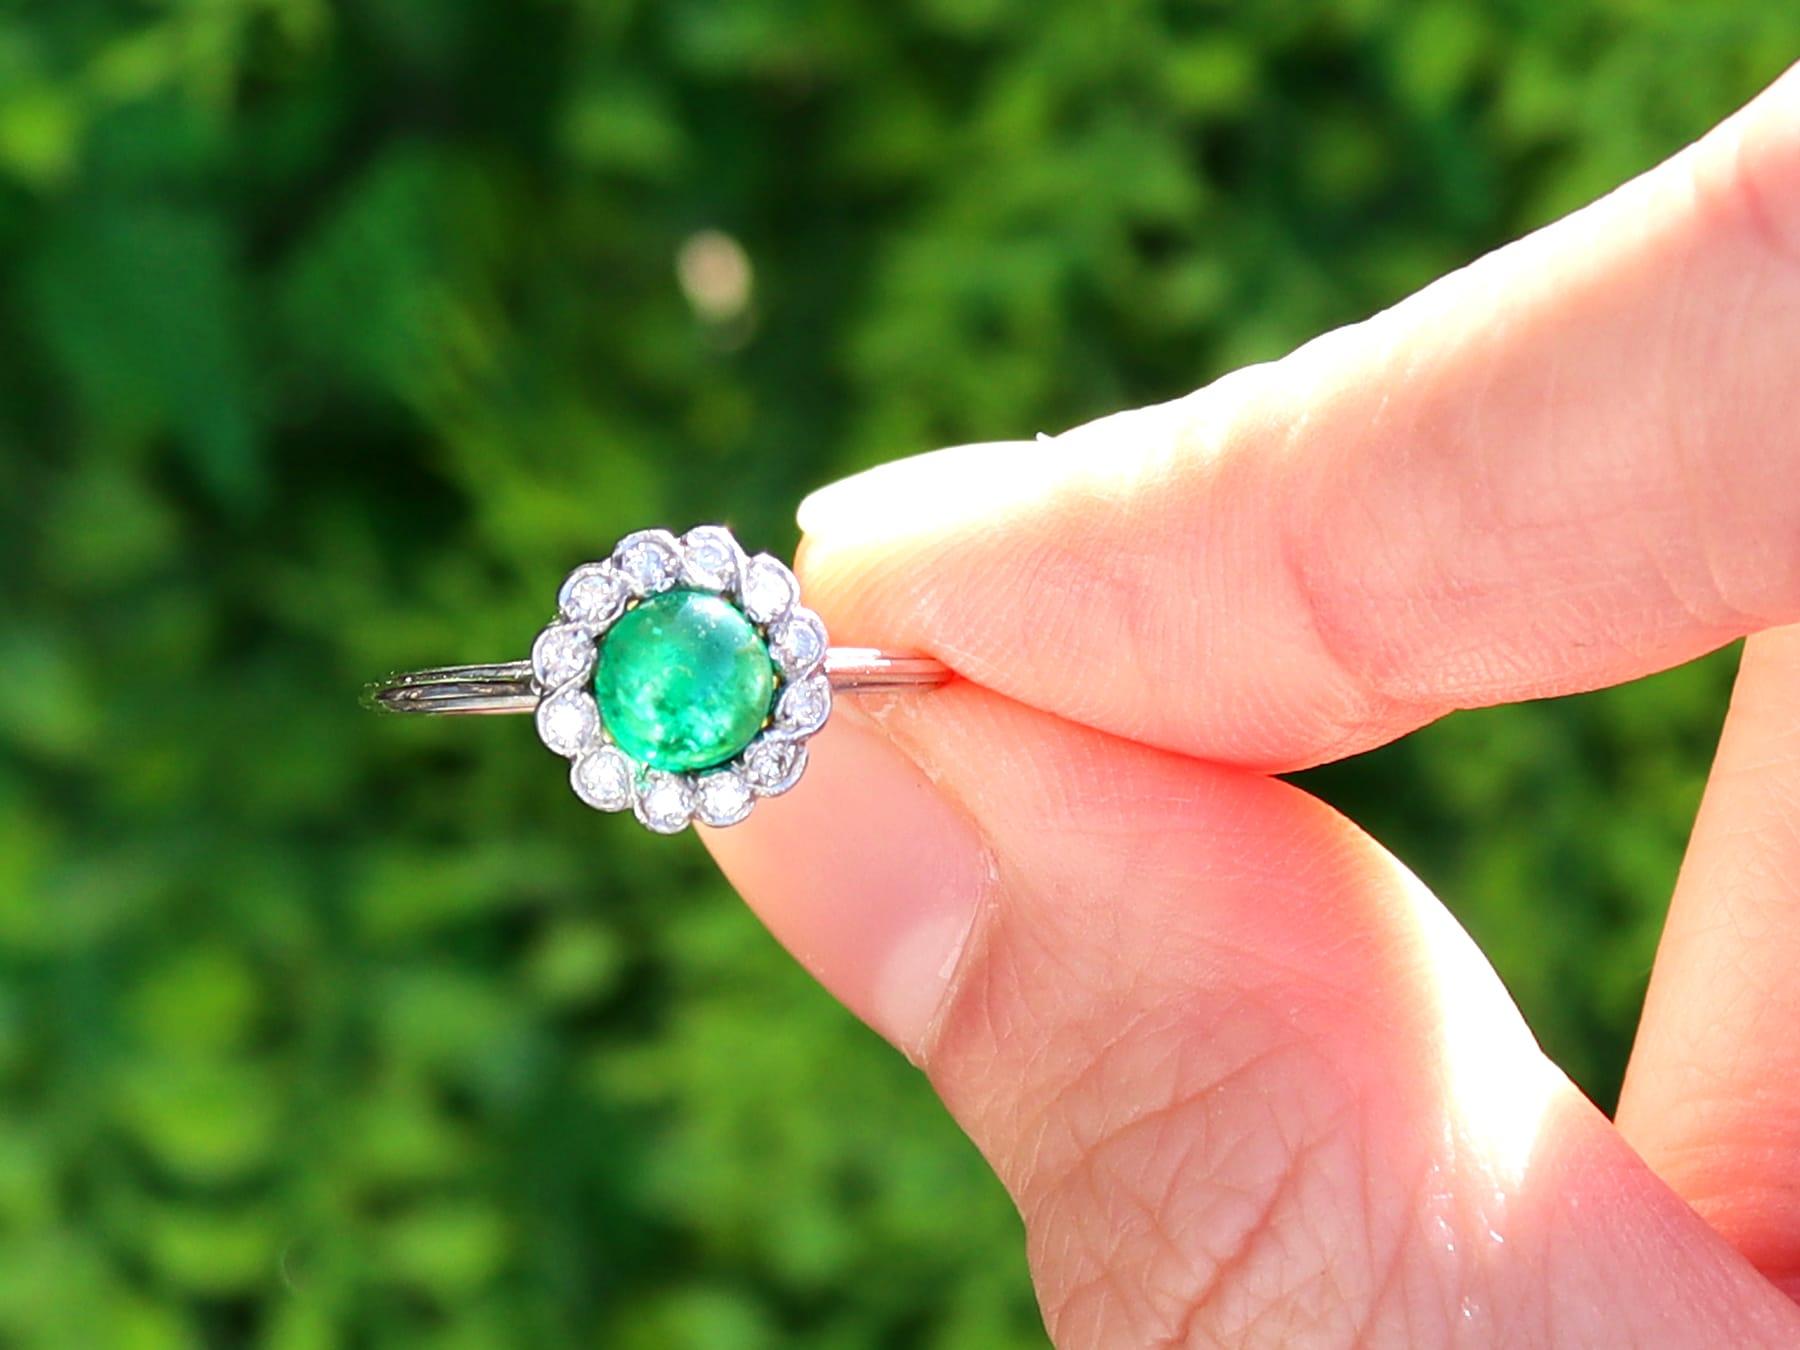 A fine and impressive antique 0.54 carat emerald and 0.24 carat diamond, platinum dress ring; part of our antique 1930s jewellery collection

This fine and impressive 1930s emerald ring with diamonds has been crafted in platinum.

The pierced